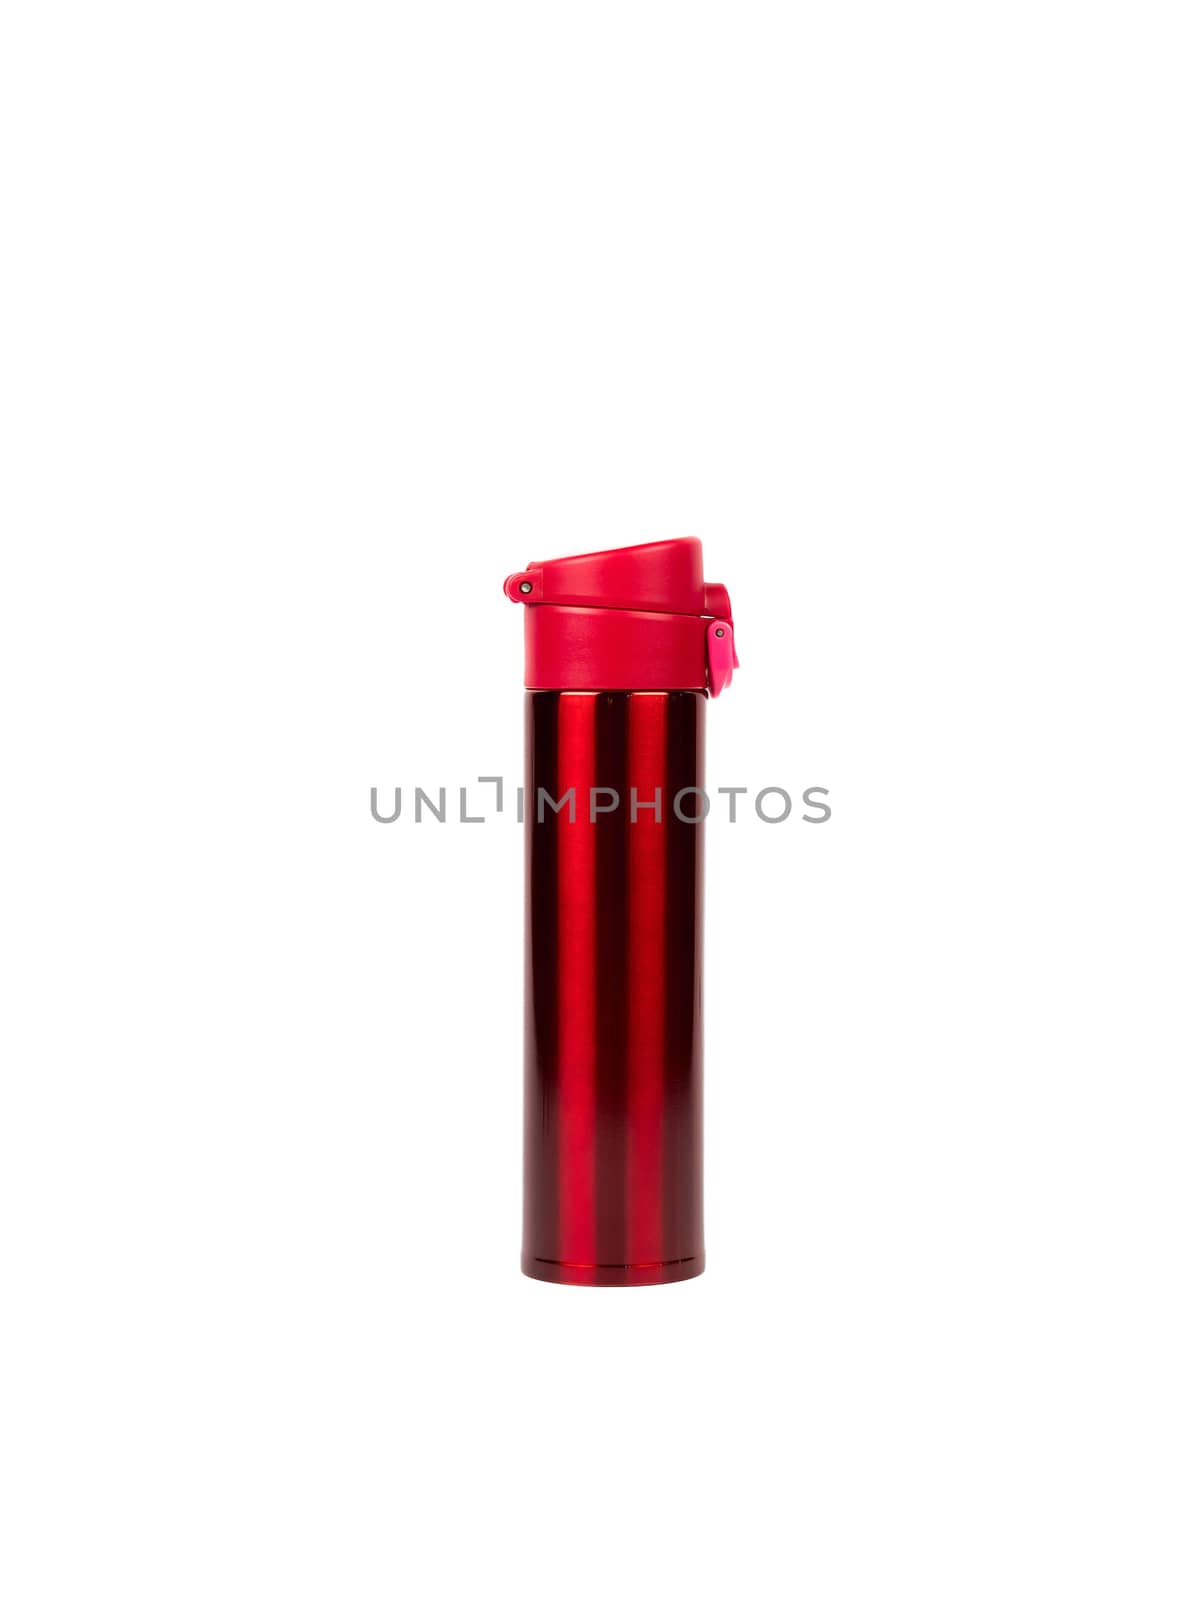 Red thermos bottle isolated on white background with copy space